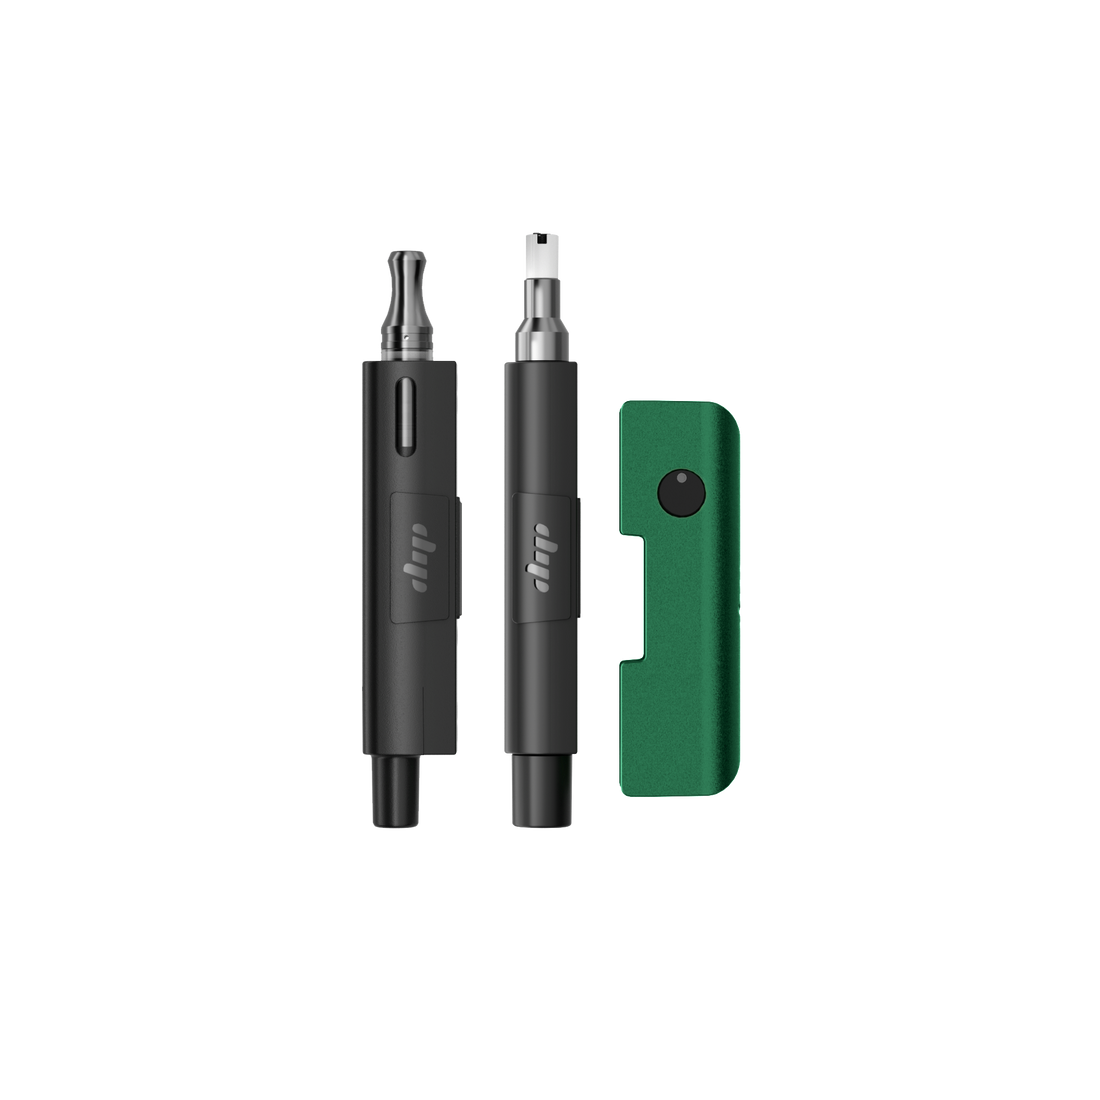 The EVRI from Dip Devices in green